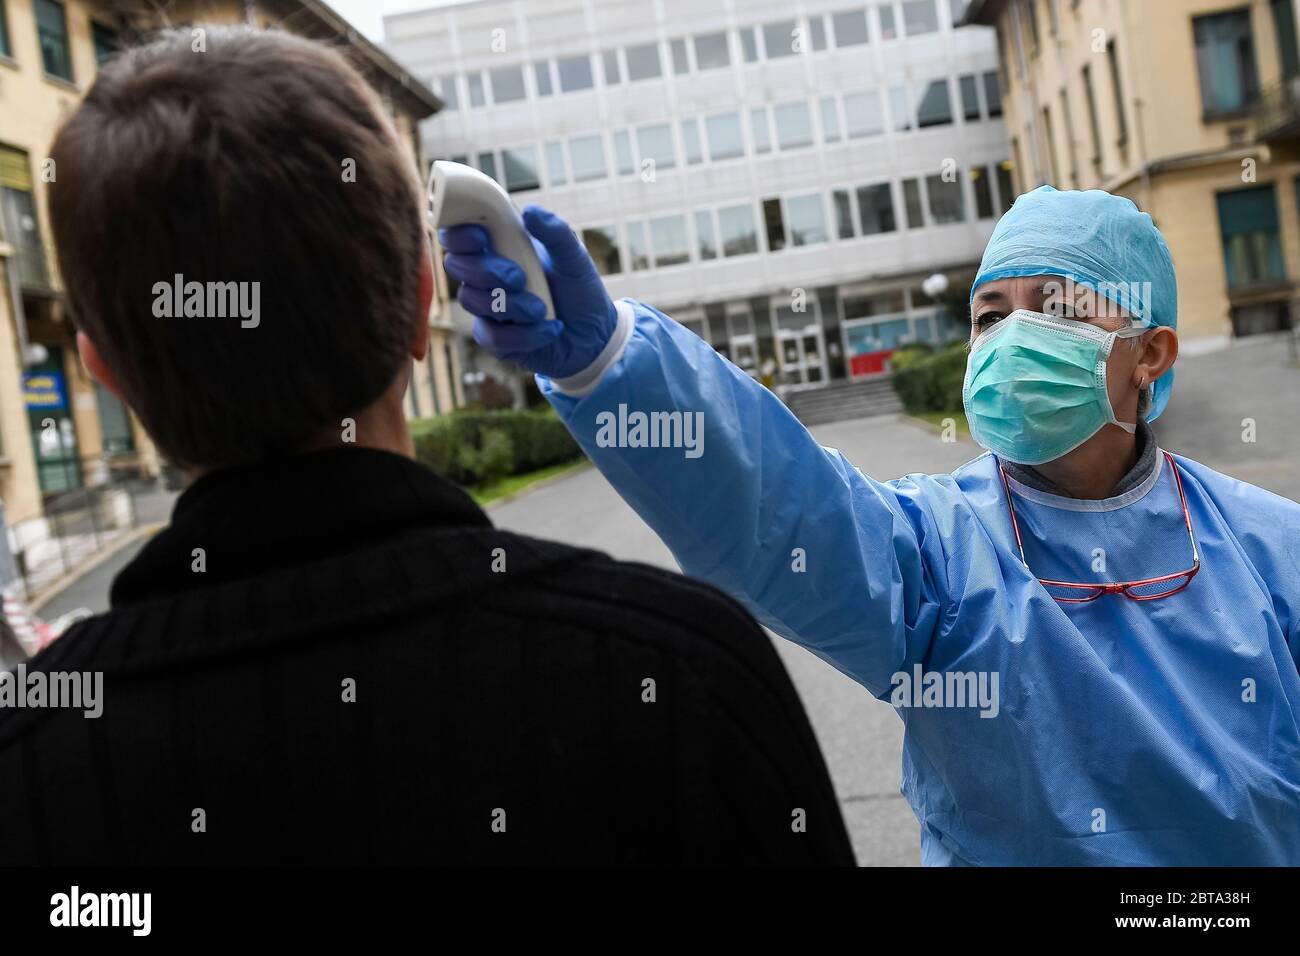 Turin, Italy - 16 March, 2020: A nurse measures temperature of a man for pre triage, to carry out coronavirus infection control tests. The Italian government imposed unprecedented restrictions to halt the spread of COVID-19 coronavirus outbreak, among other measures people movements are allowed only for work, for buying essential goods and for health reasons. Credit: Nicolò Campo/Alamy Live News Stock Photo